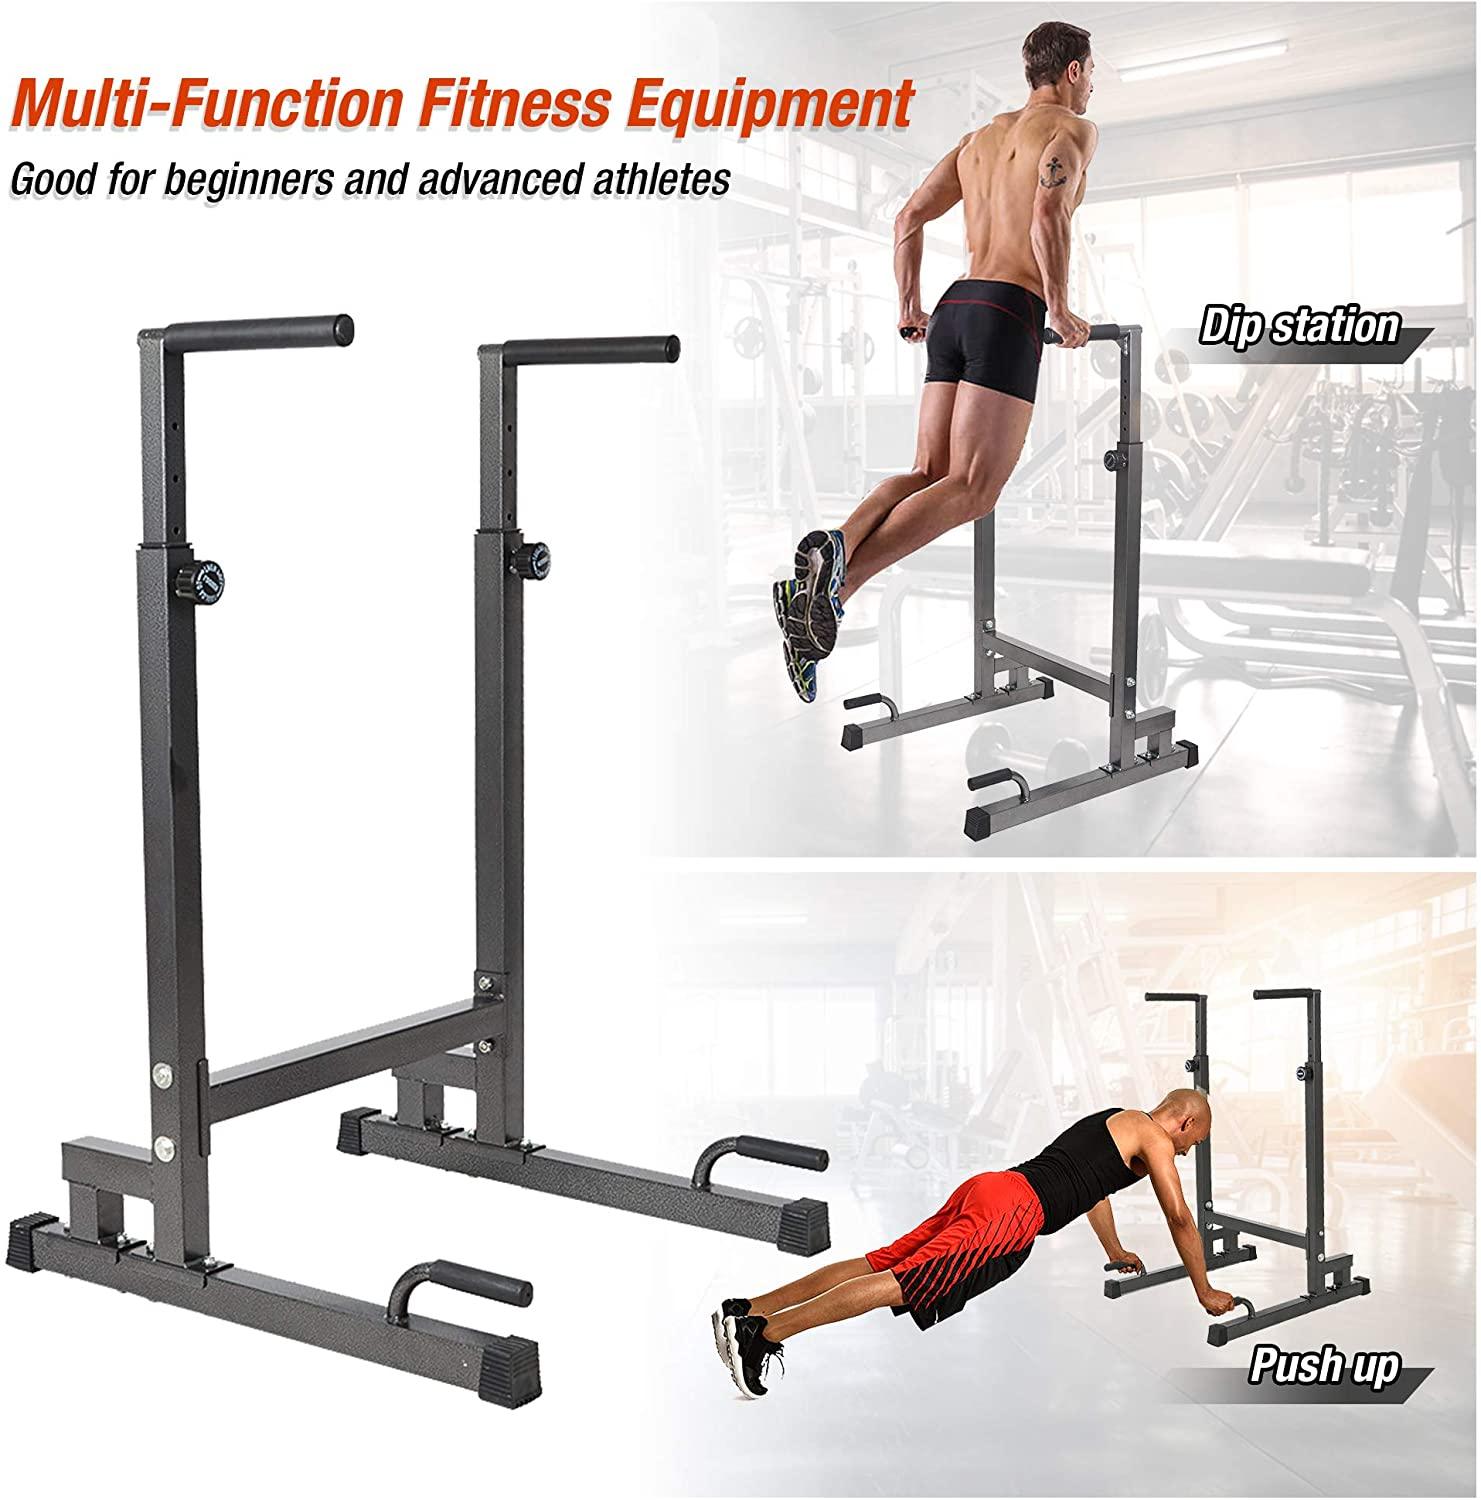 Adjustable Multi-Function Strength Training Dip Stand Station Pull Push Up Bar For Home Gym - Bosonshop